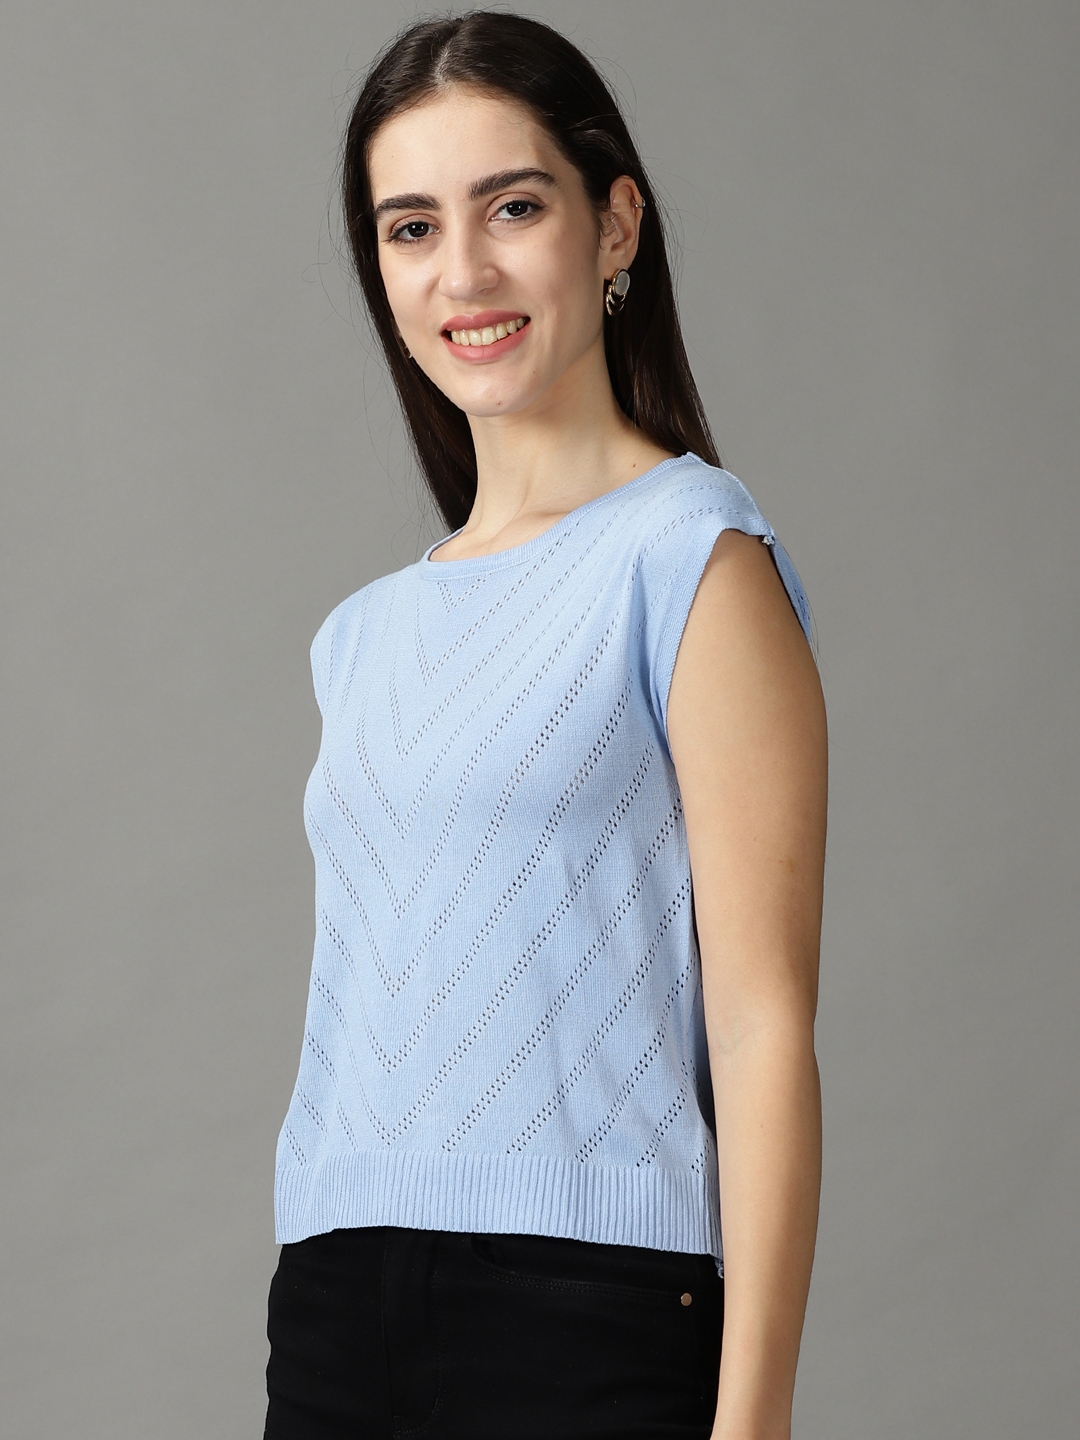 Women's Blue Acrylic Solid Tops